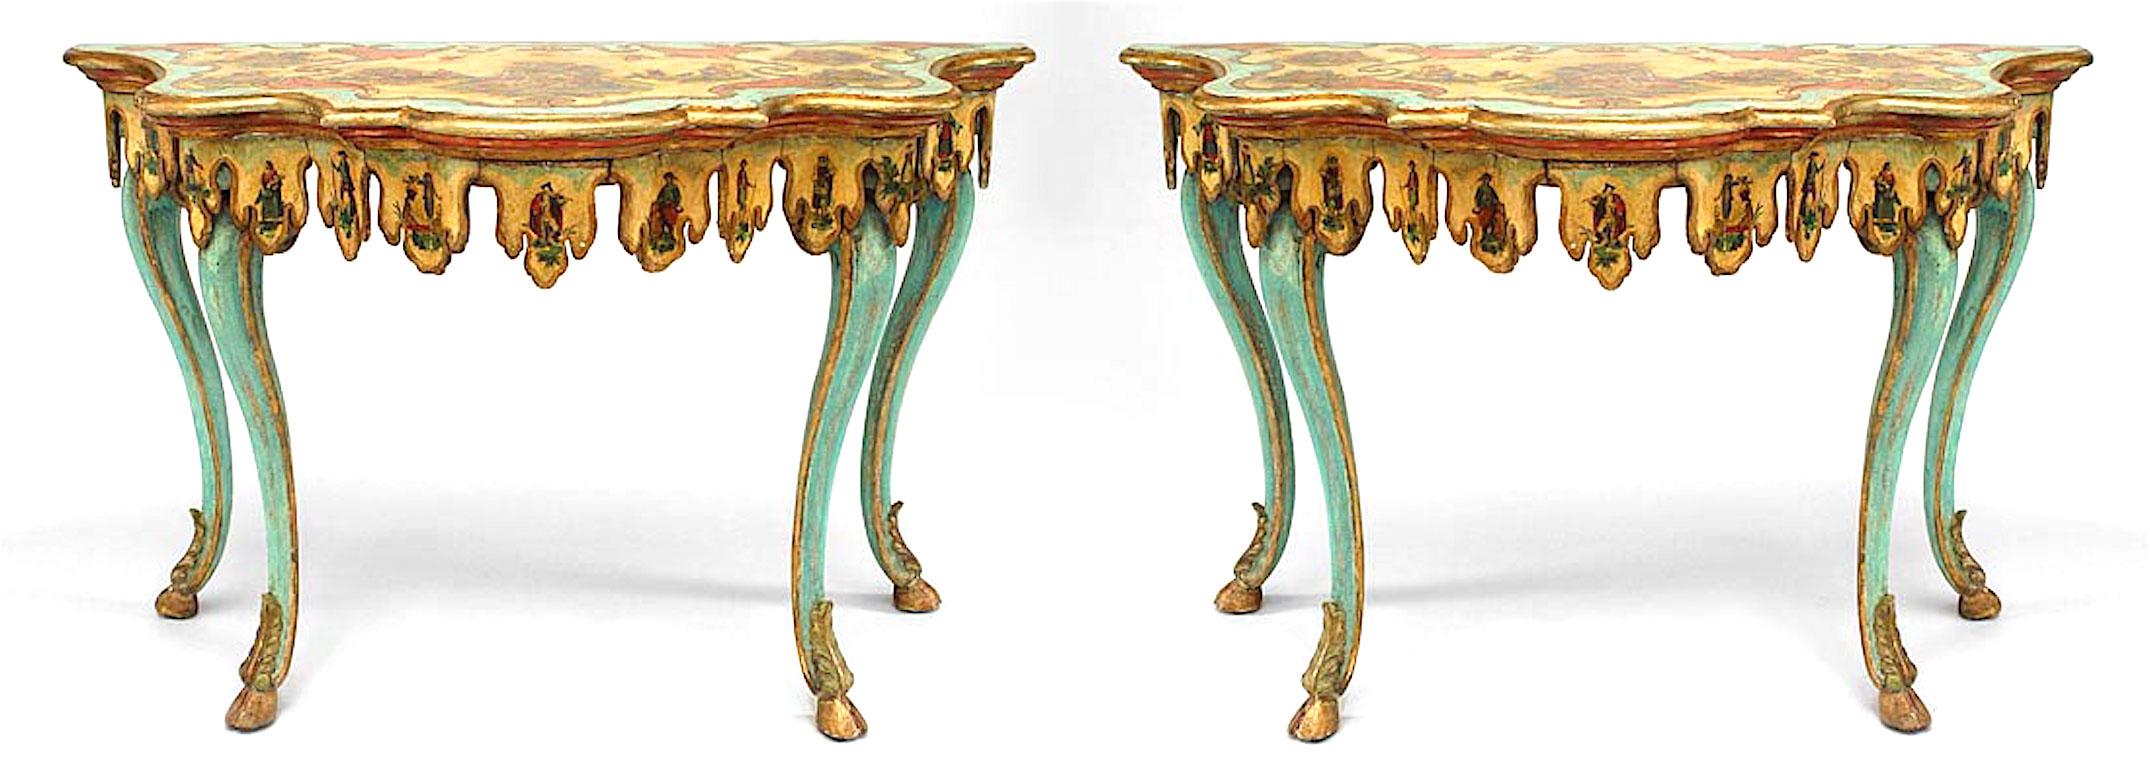 Pair of Venetian console tables dating to the turn of the nineteenth century. These wooden tables are green, red, yellow, and gilt painted and feature lacca povera decoration on their serpentine tops and scalloped apron. Each table rests upon four